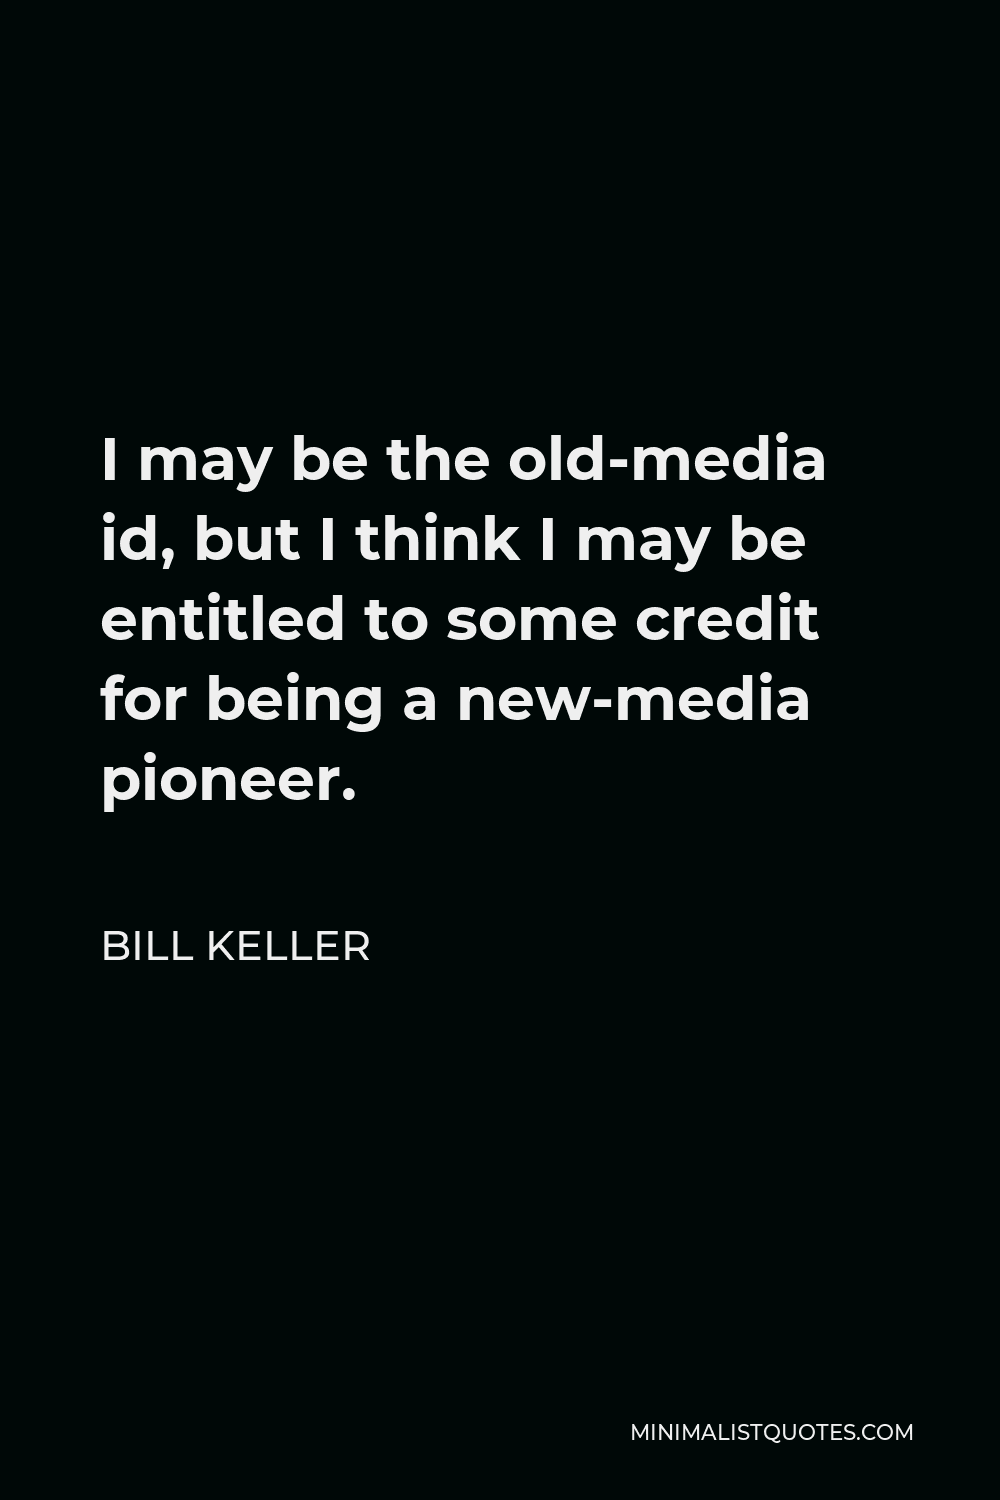 Bill Keller Quote - I may be the old-media id, but I think I may be entitled to some credit for being a new-media pioneer.